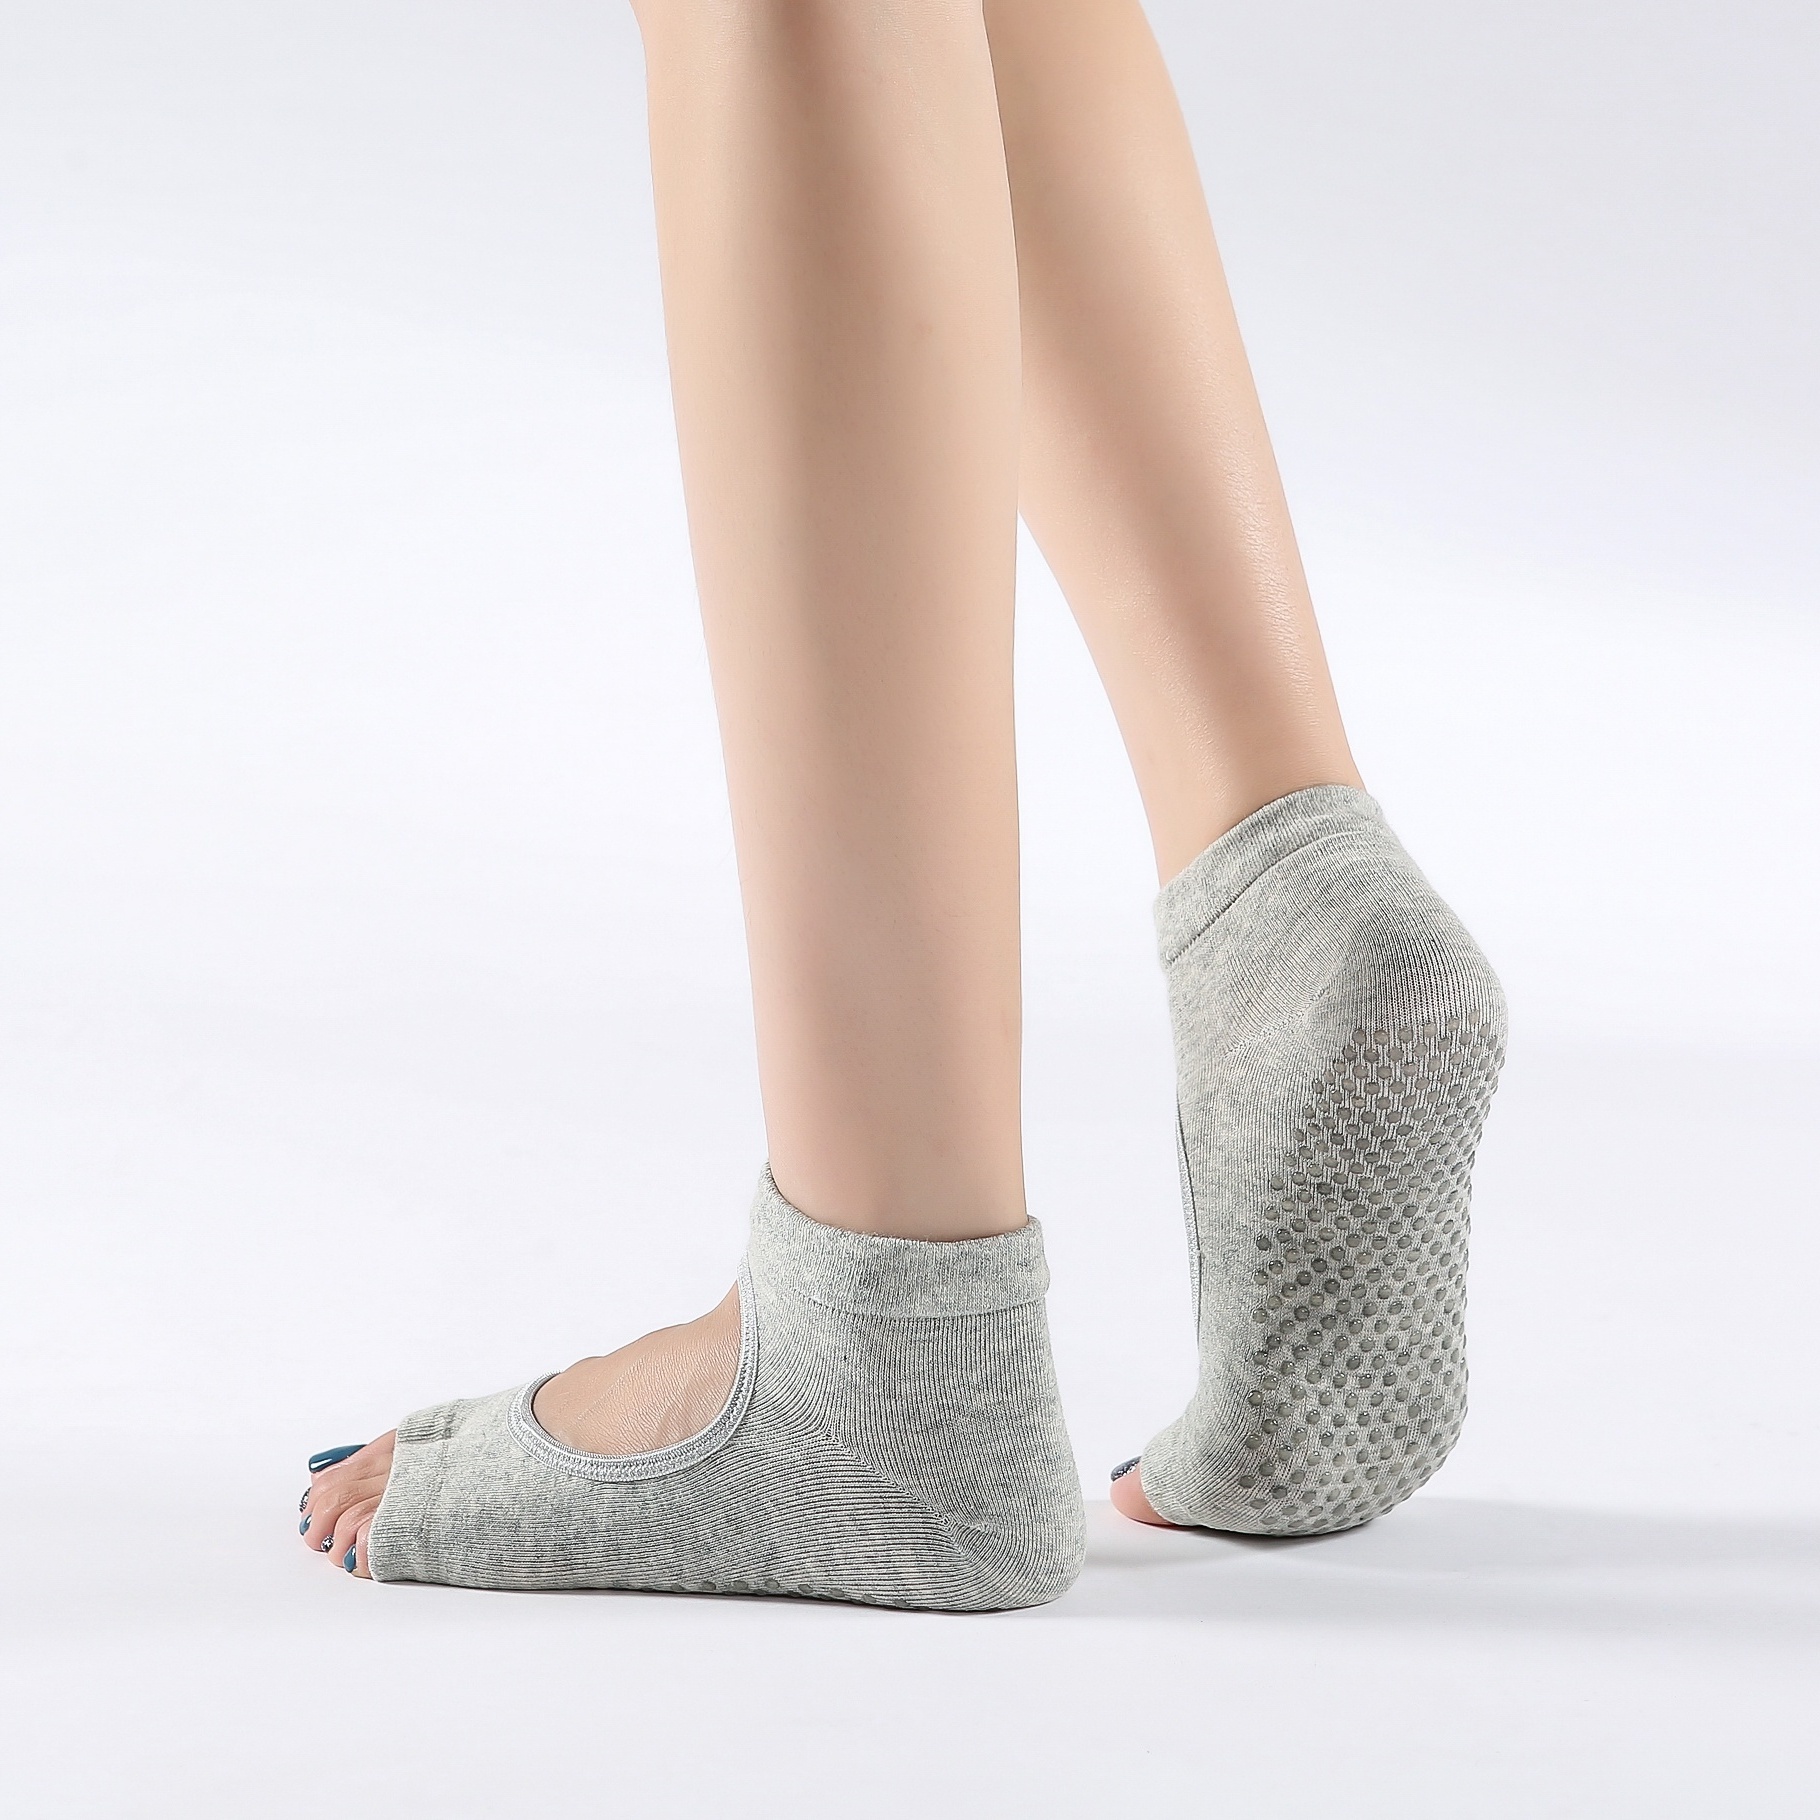 Womens Split Toe Yoga Socks No Toes With Slippery Open Back And Open Finger  Design For Pilates And Dance From Dickssportingsneaker, $4.05